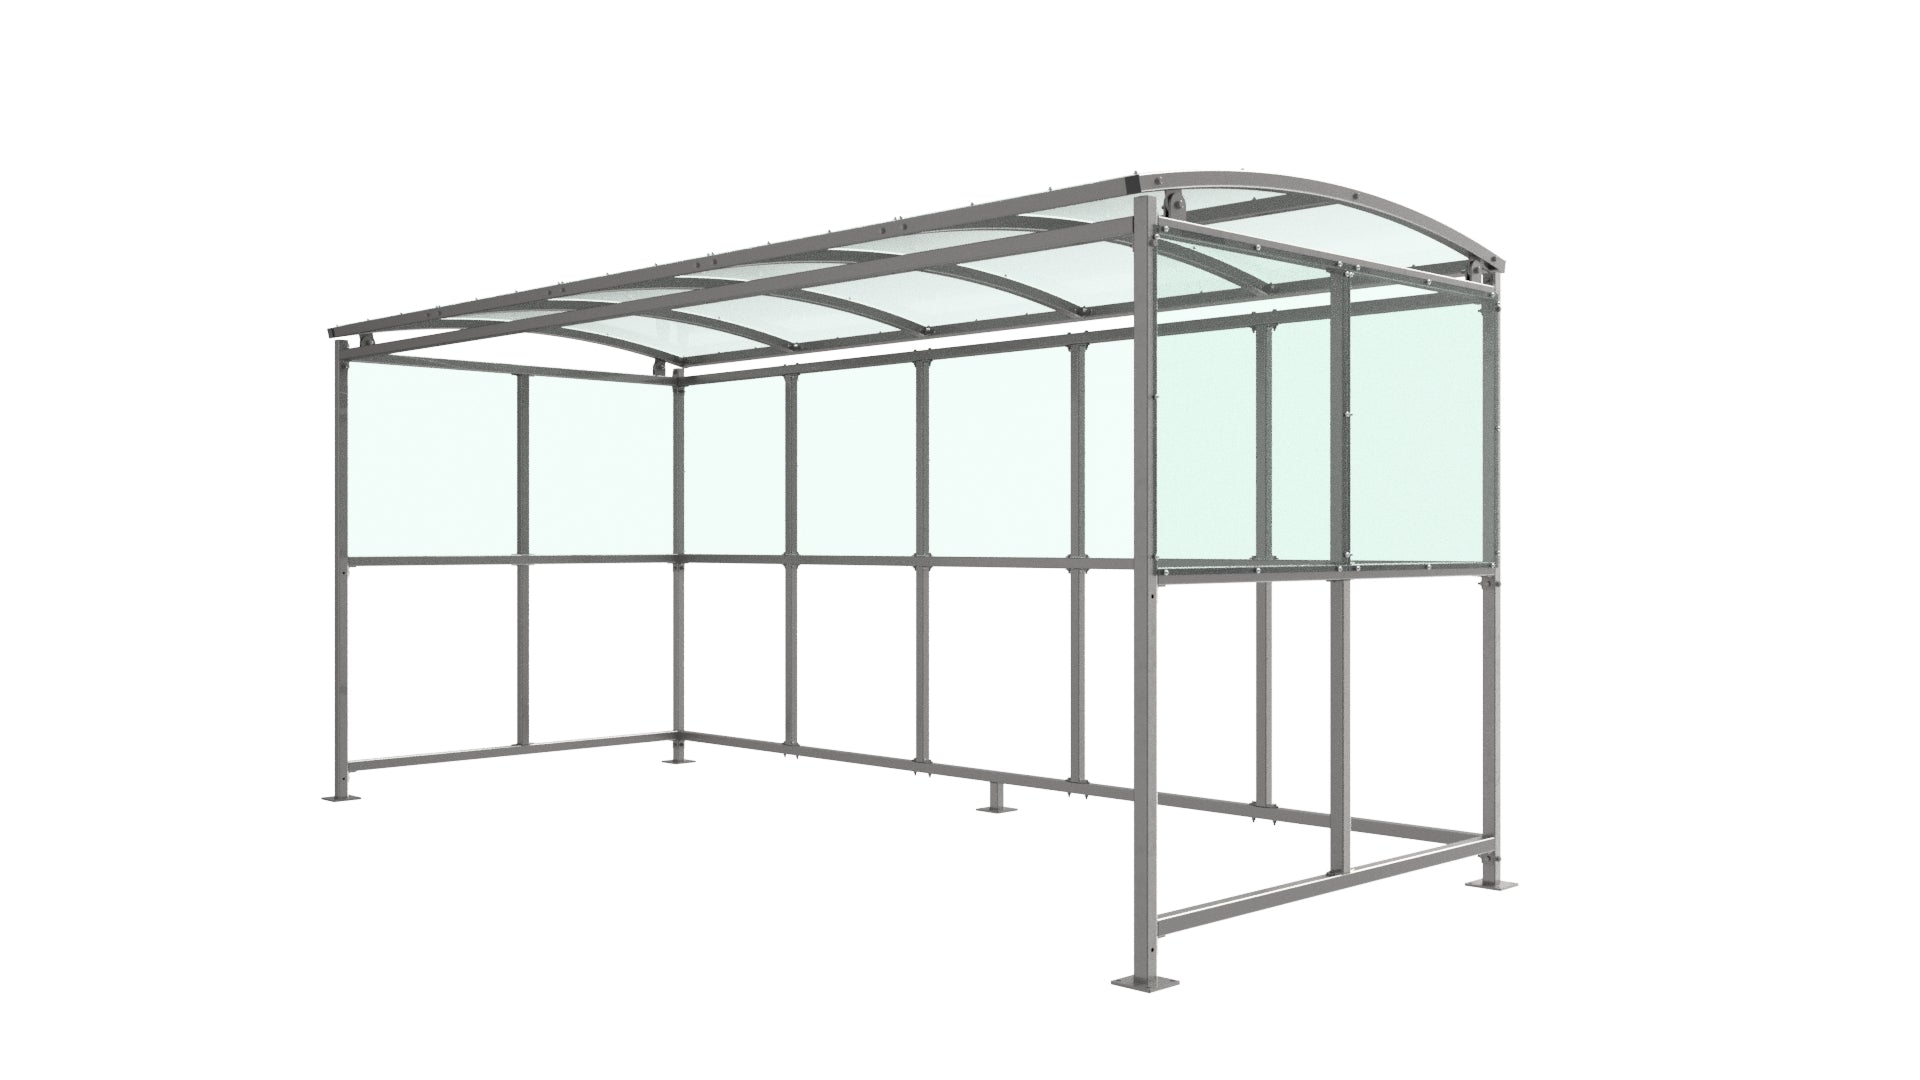 Brandon Cycle Shelter Galvanised Steel Frame Open Sided